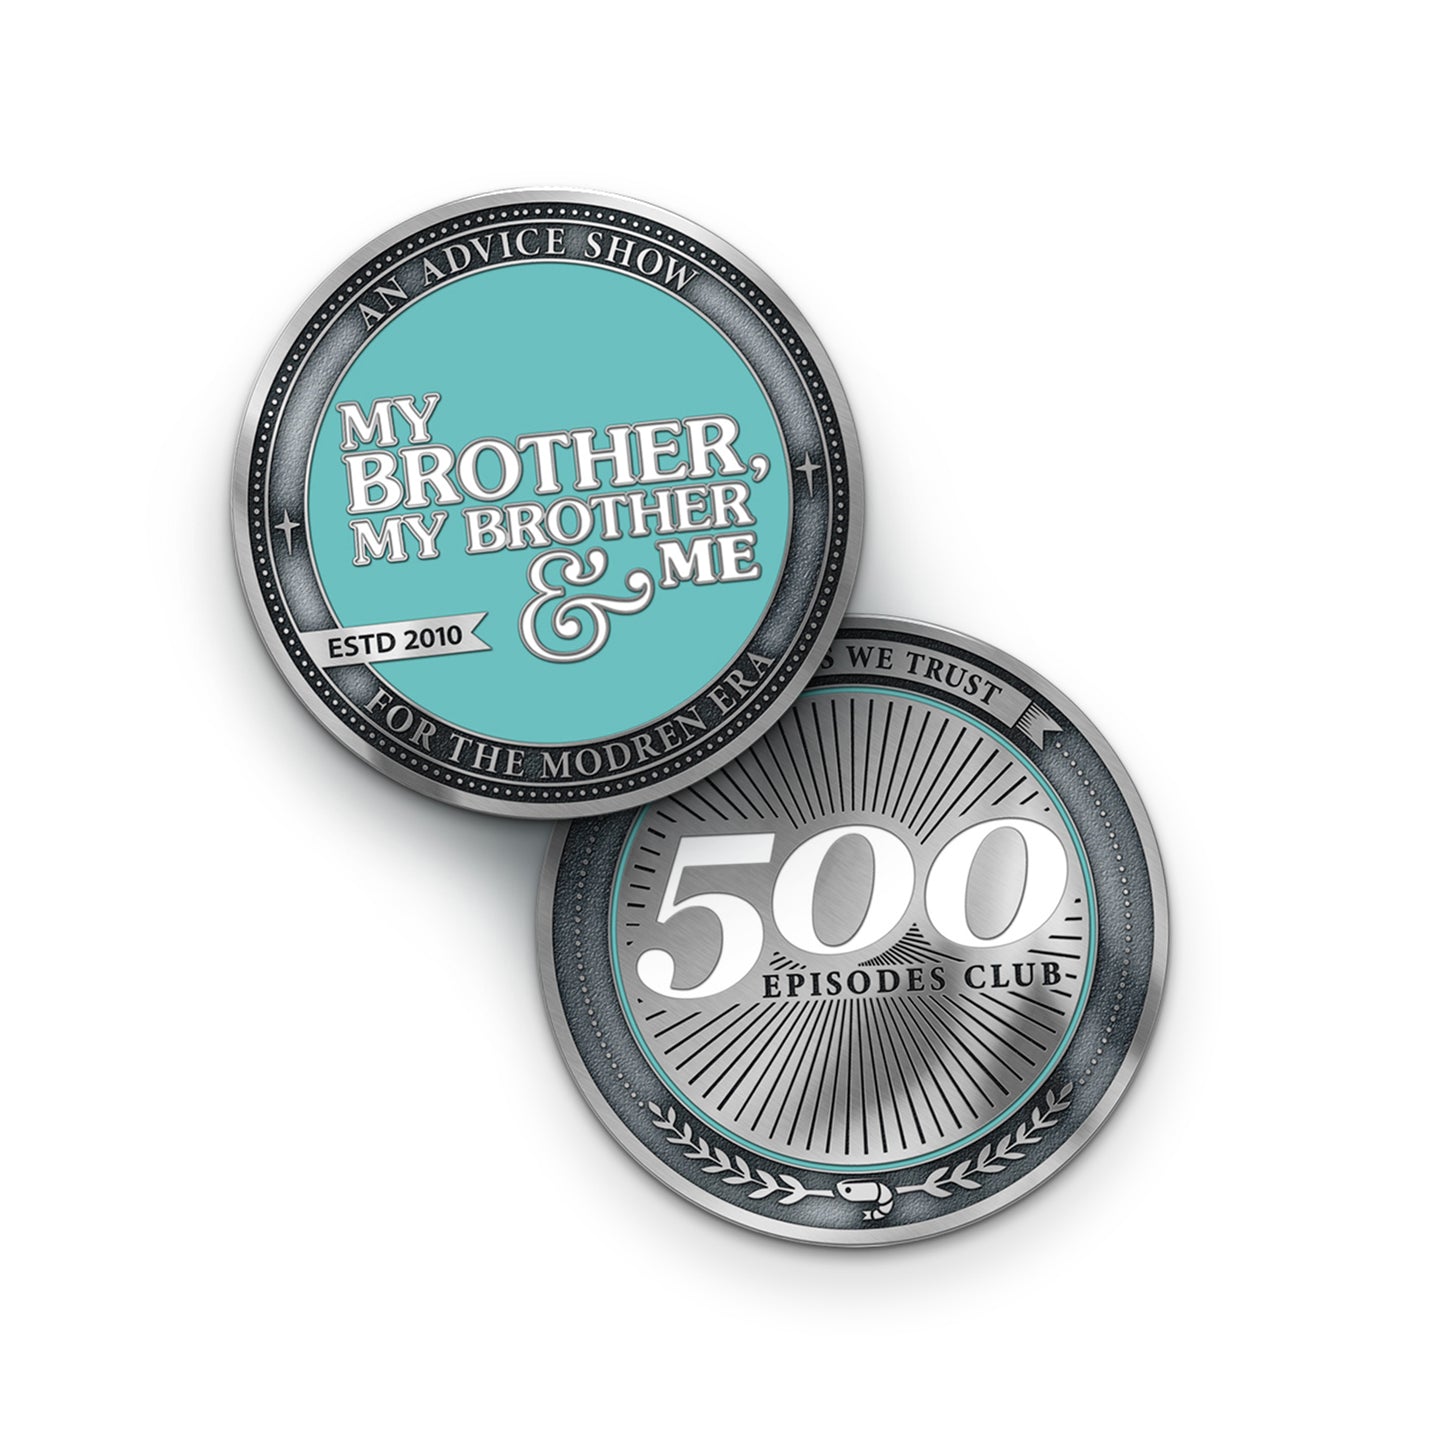 Two sides of a silver coin. The front has a teal center that says, "My Brother, My Brother & Me" in white. Around it is a border that says "An advice show for the modren era" with a silver banner that says "ESTD 2010". There is a border around that of dots. The back says "500 episodes club" in the center with black rays coming off if it. There is a border that says, "In goofs we trust". At the bottom of the coin is two laurels with a shrimp in the middle and a border of small dots.